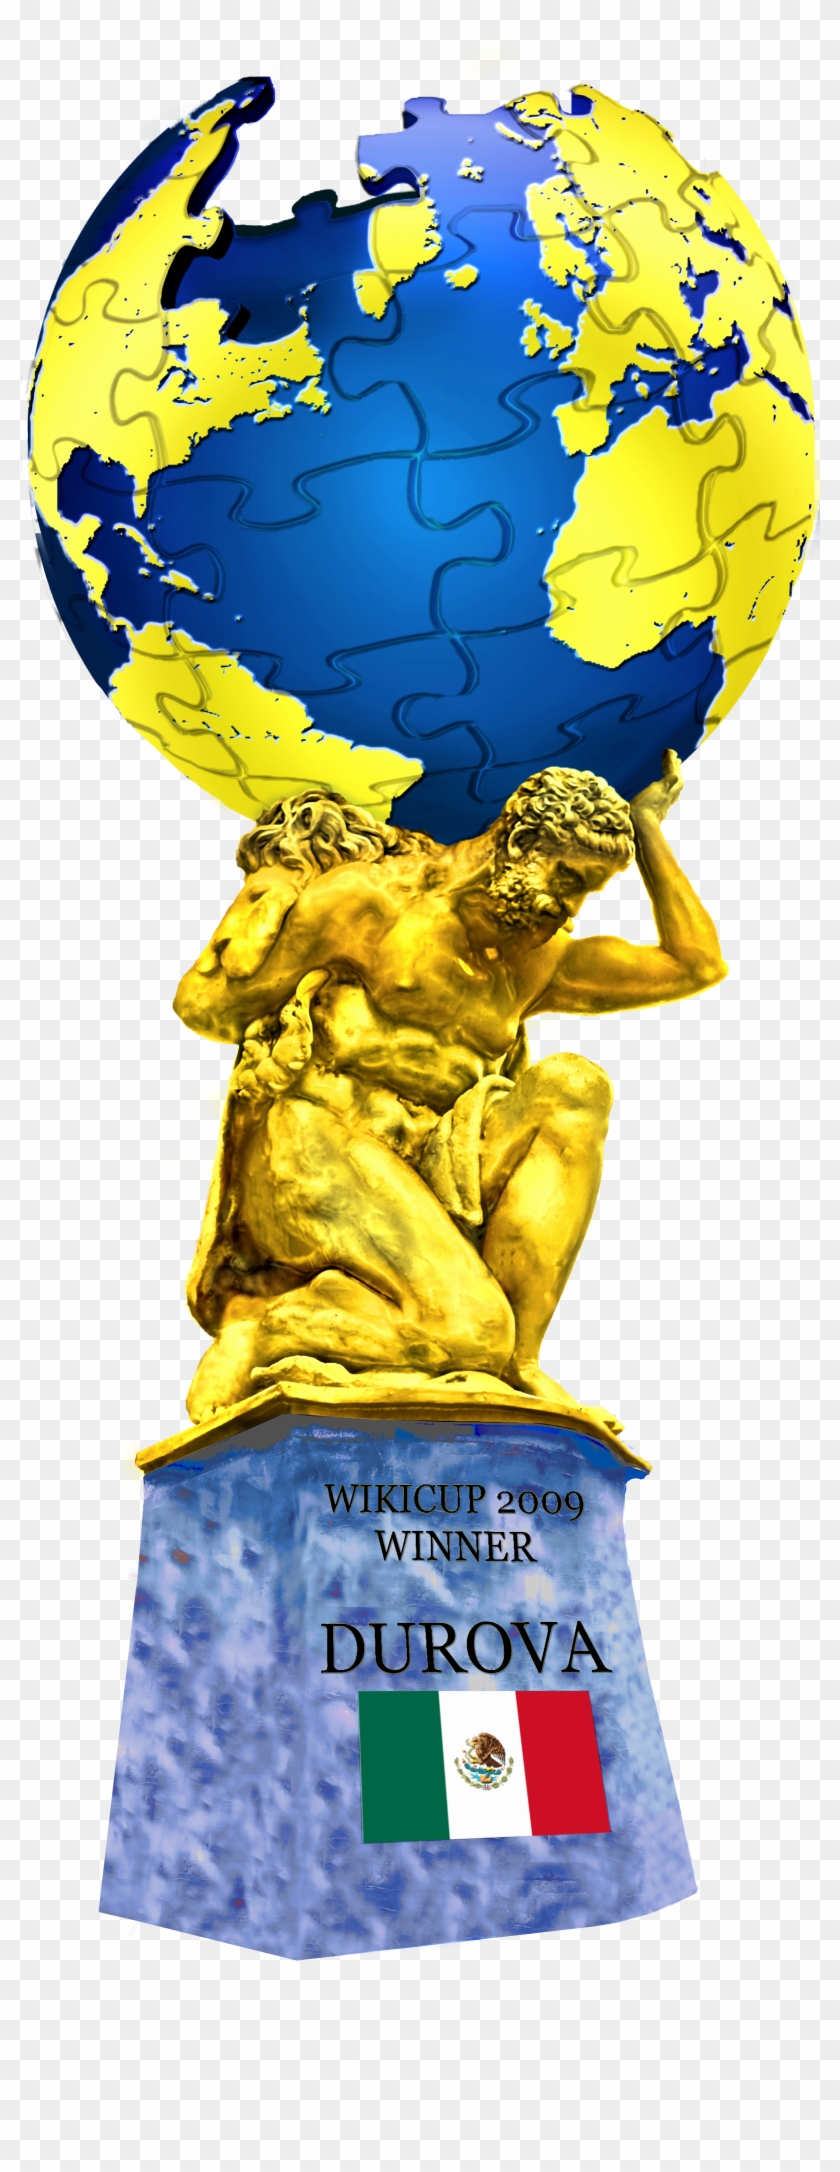 Wikicup Trophy Winner - World Statue Png Clipart #257135